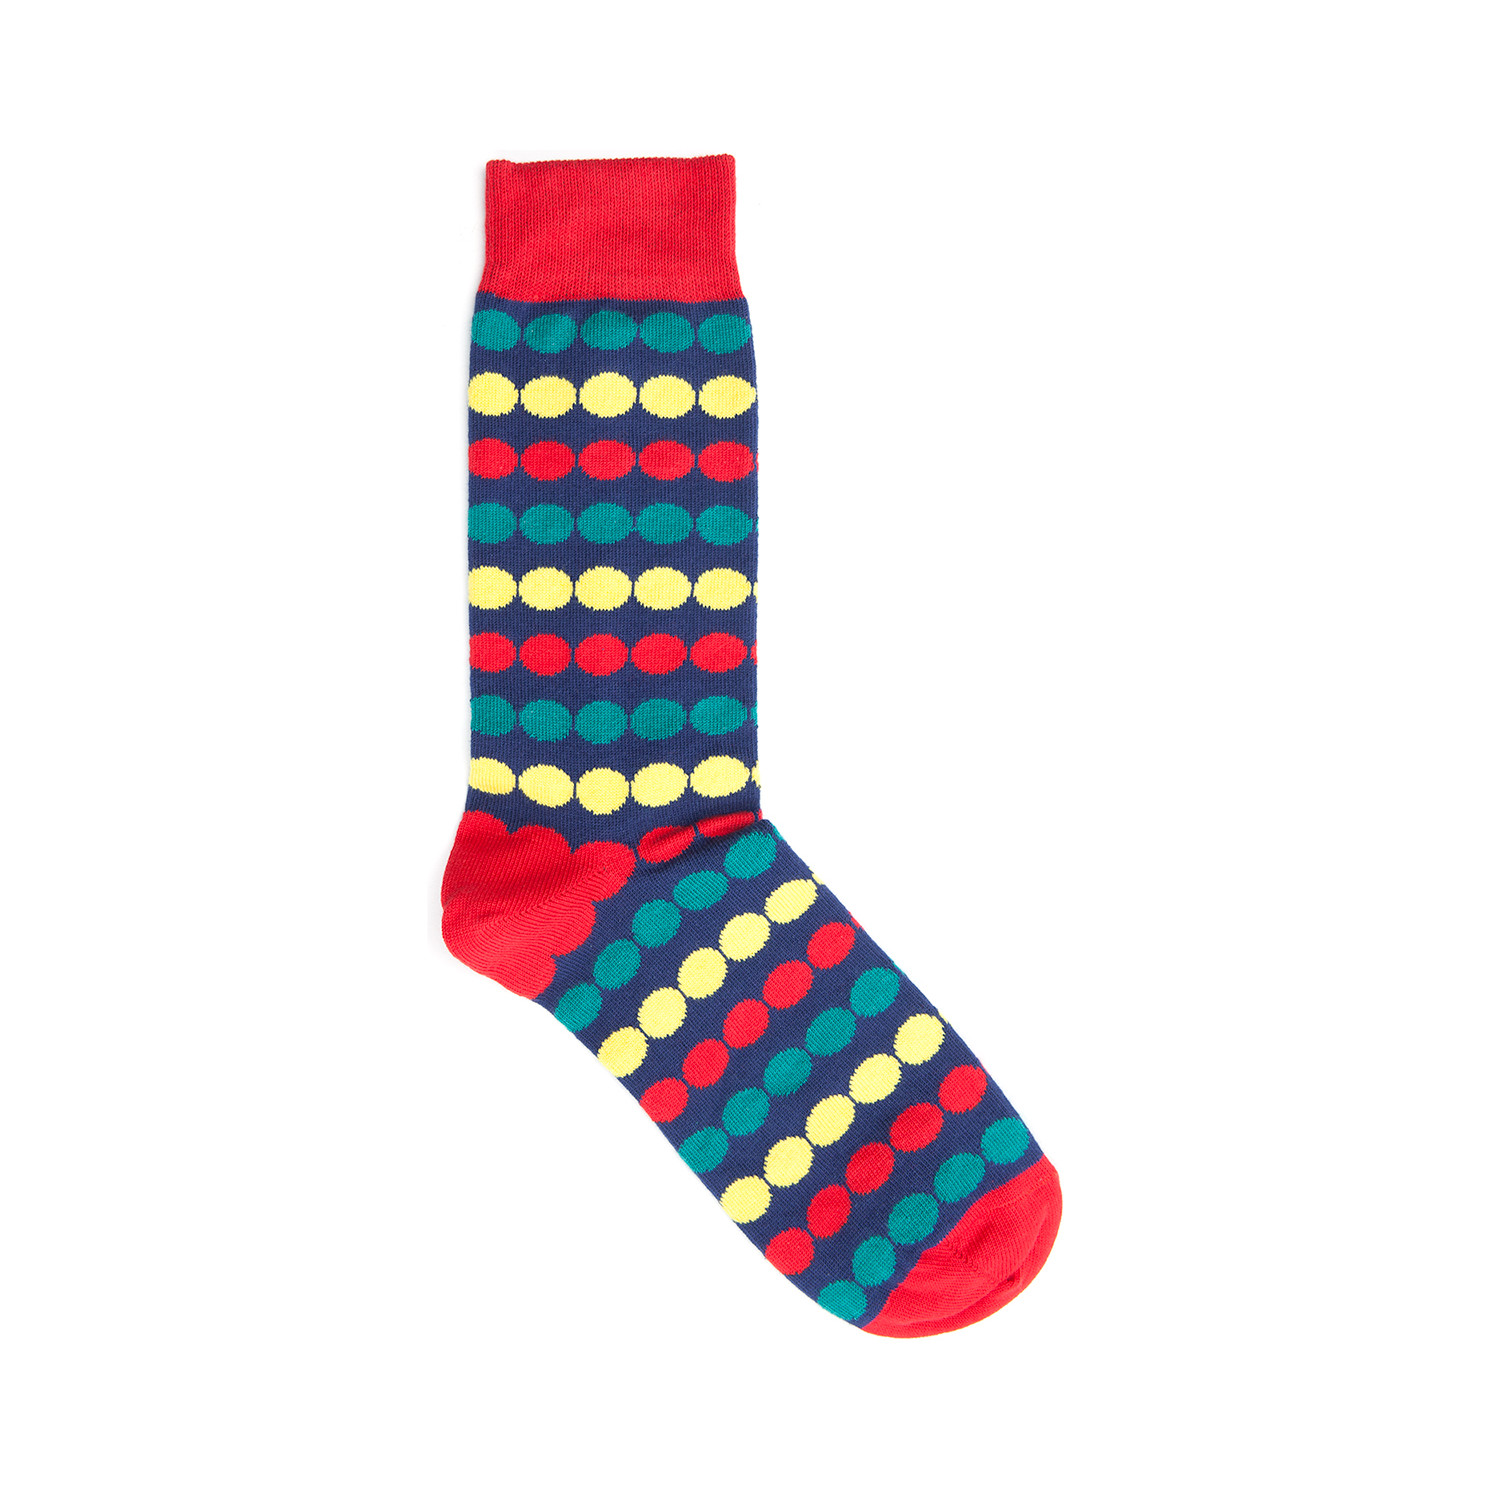 Spotted Socks // Navy - Loco Socks - Touch of Modern